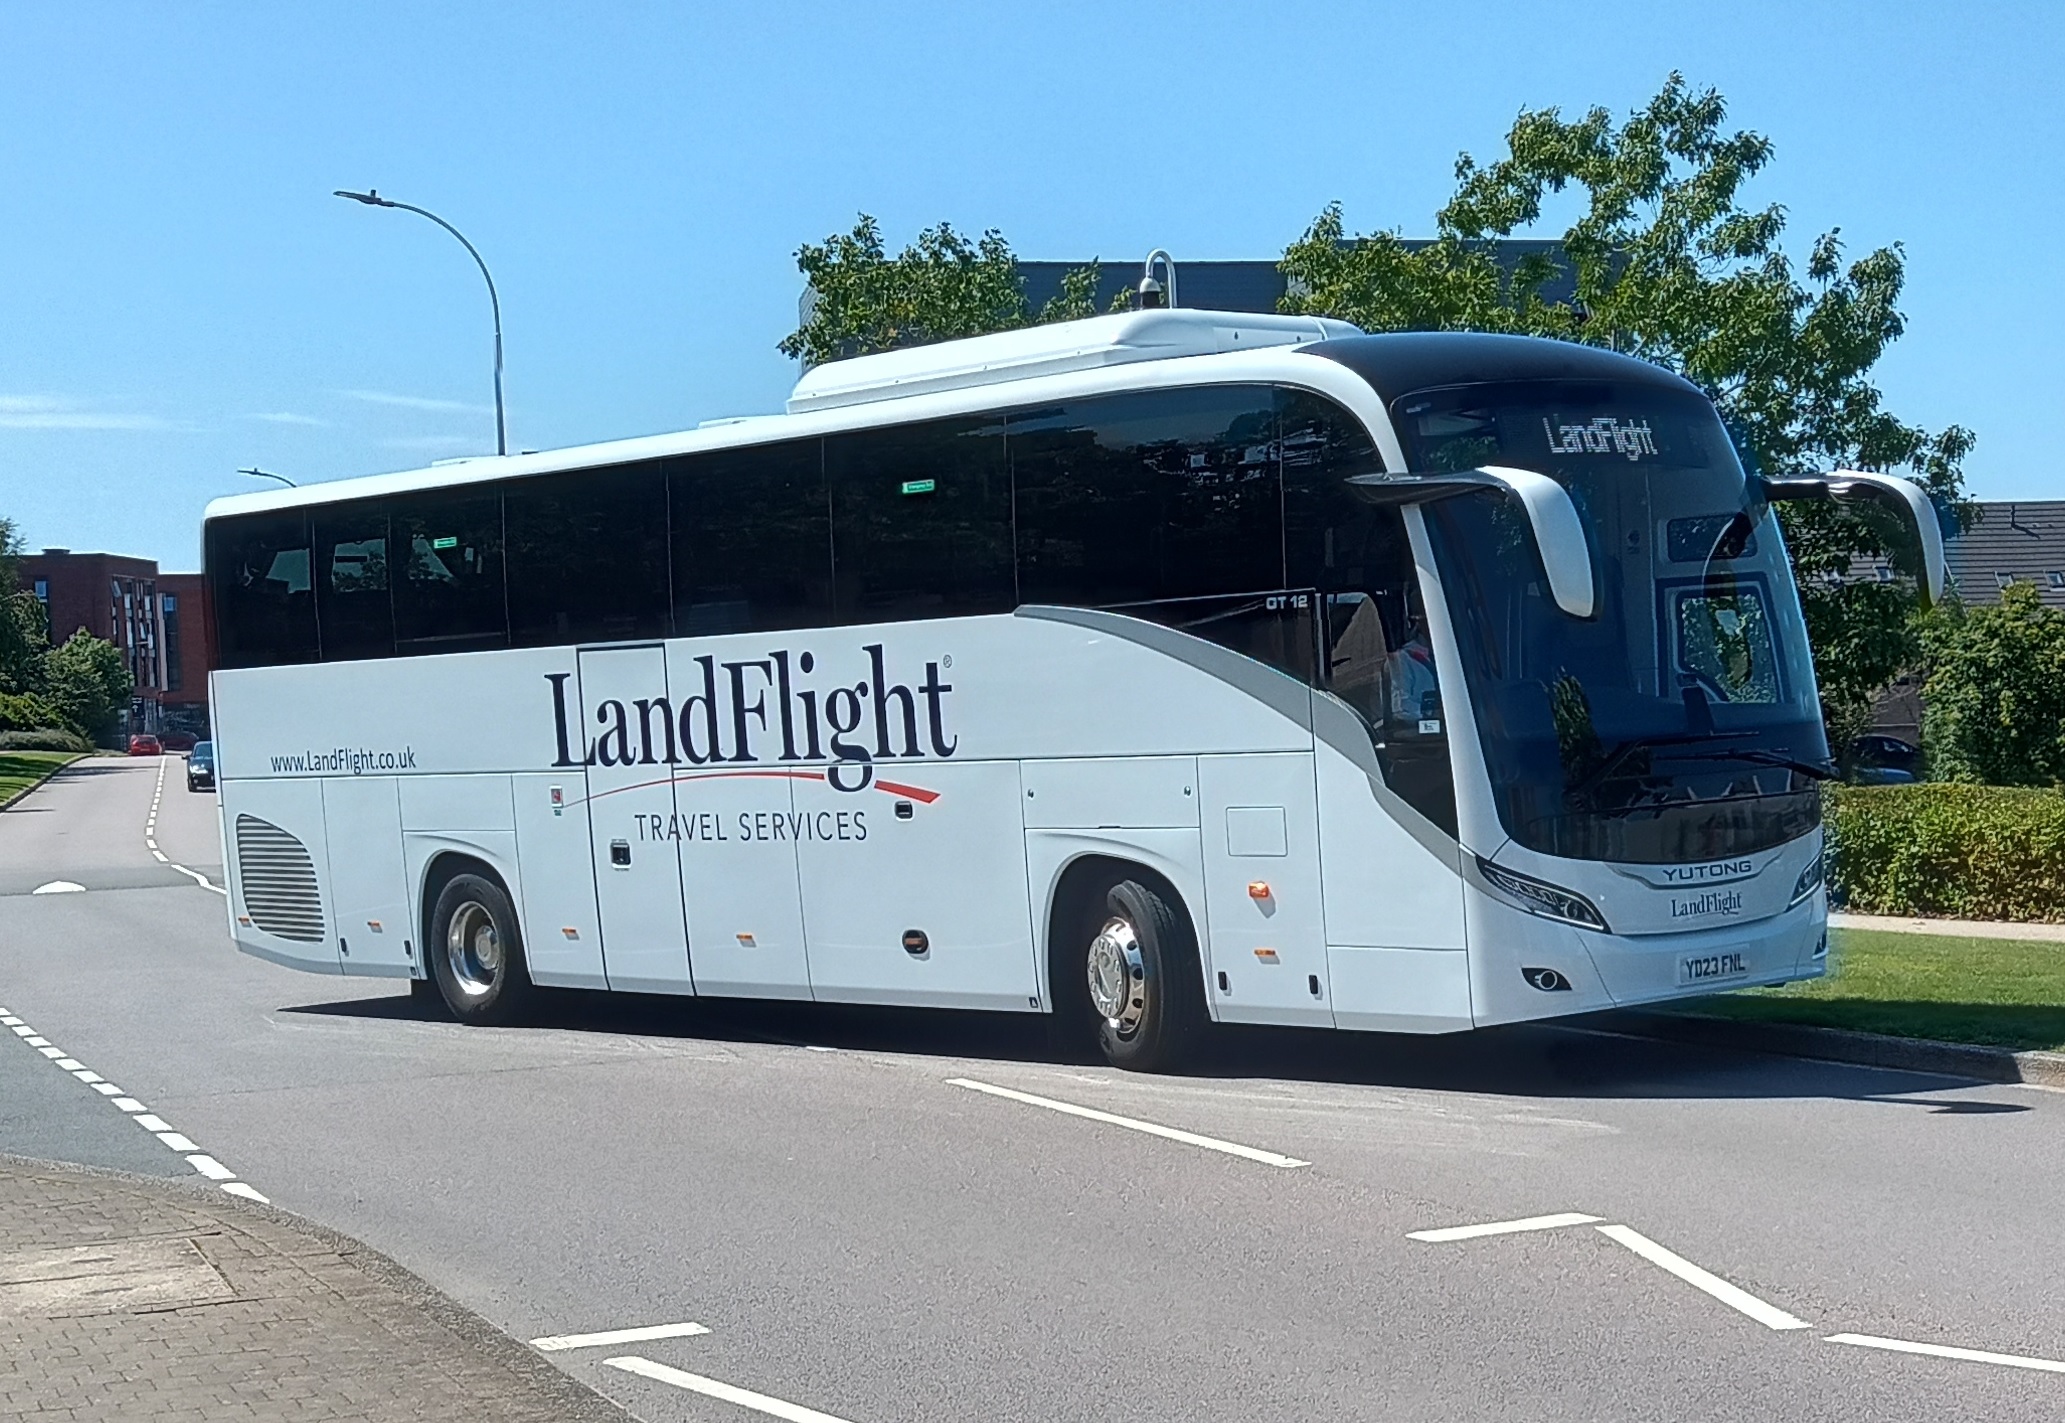 Yutong GT12 delivered to Landflight Travel Services